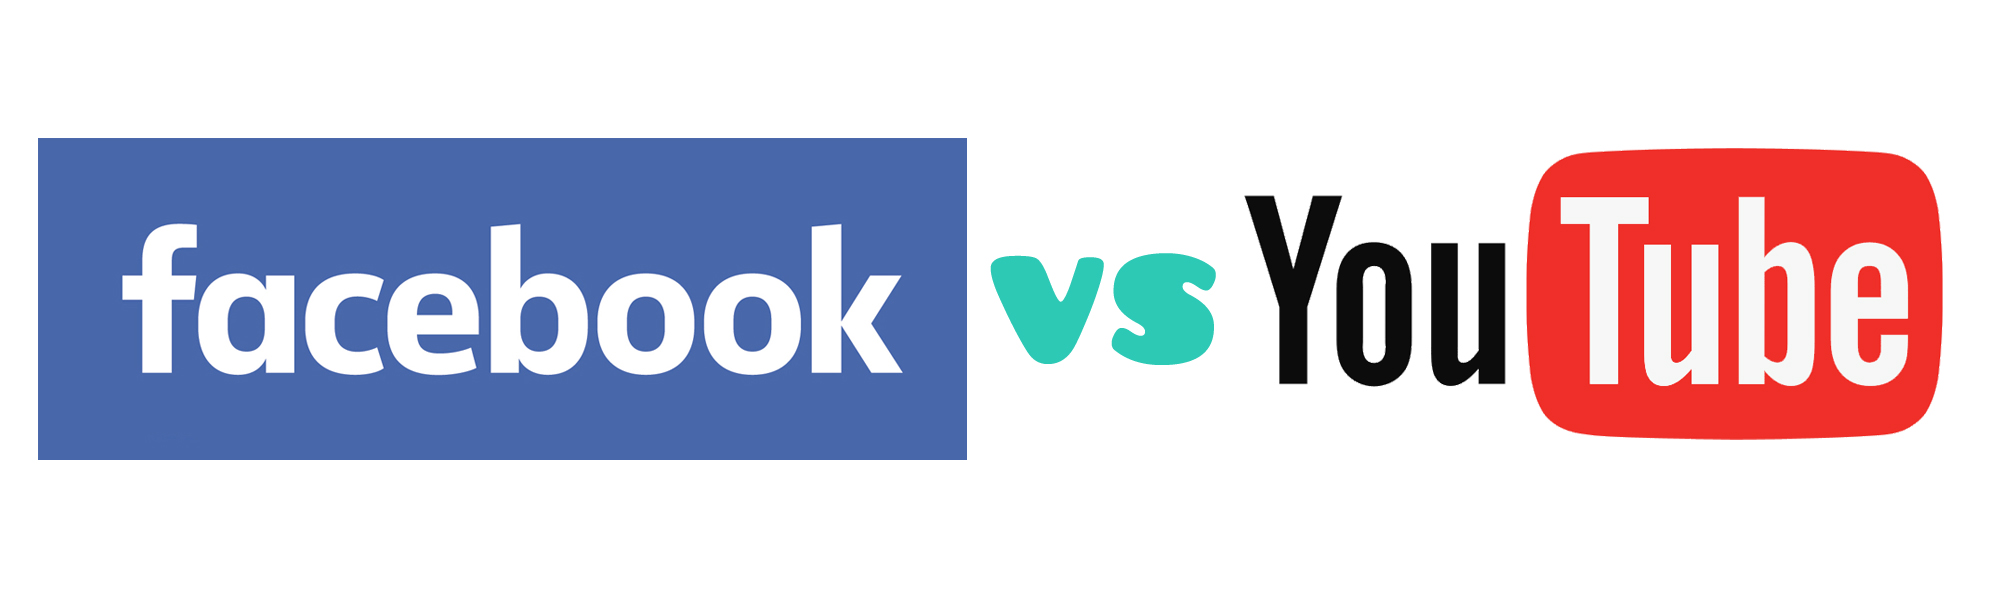 Can Facebook Dethrone YouTube on Video?